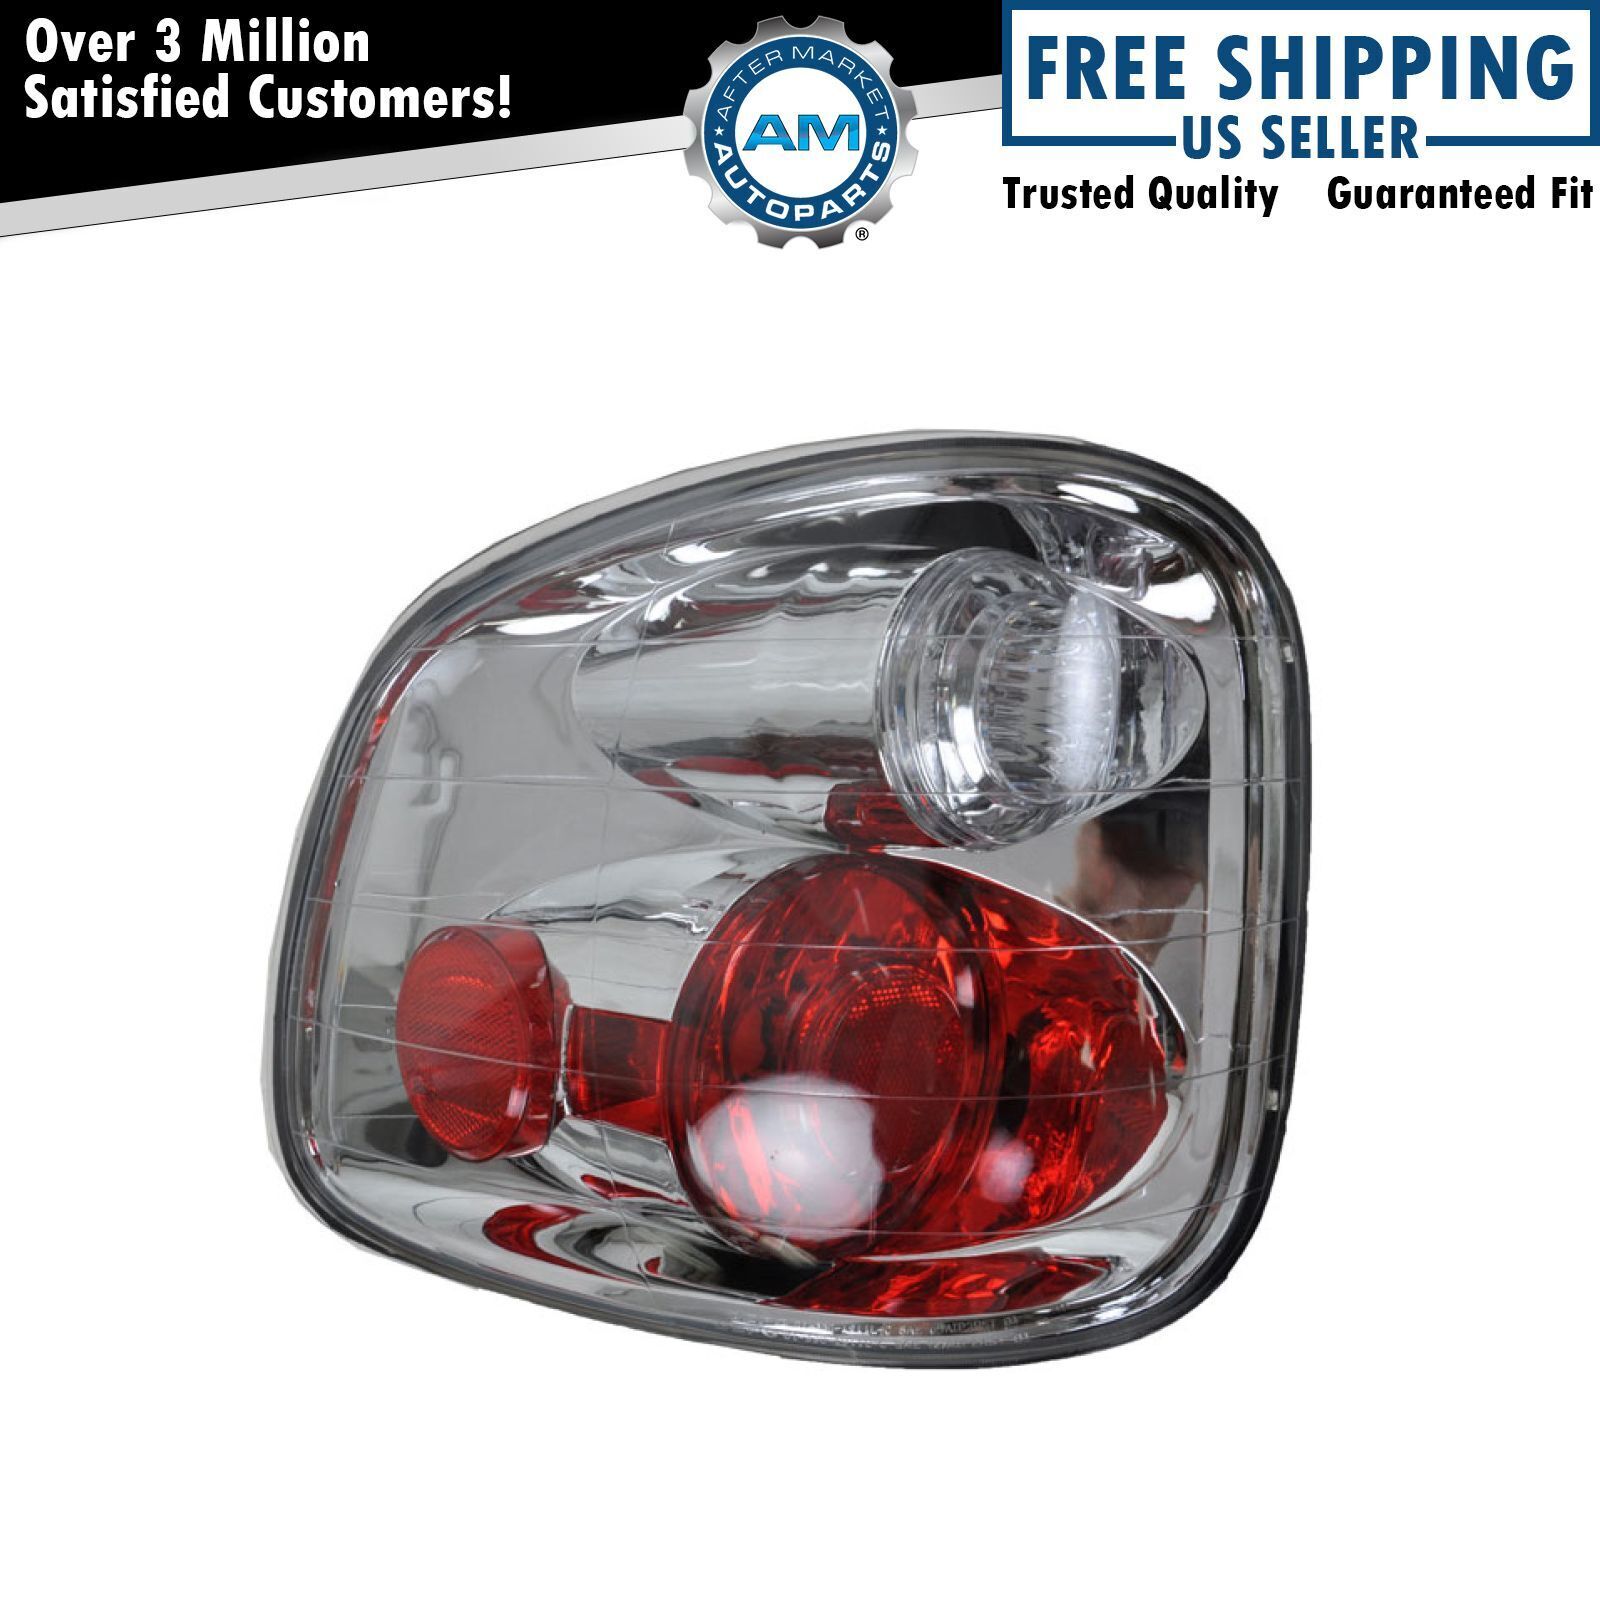 Taillight Taillamp Driver Side Left LH for 01-04 F150 Lightning Pickup Truck